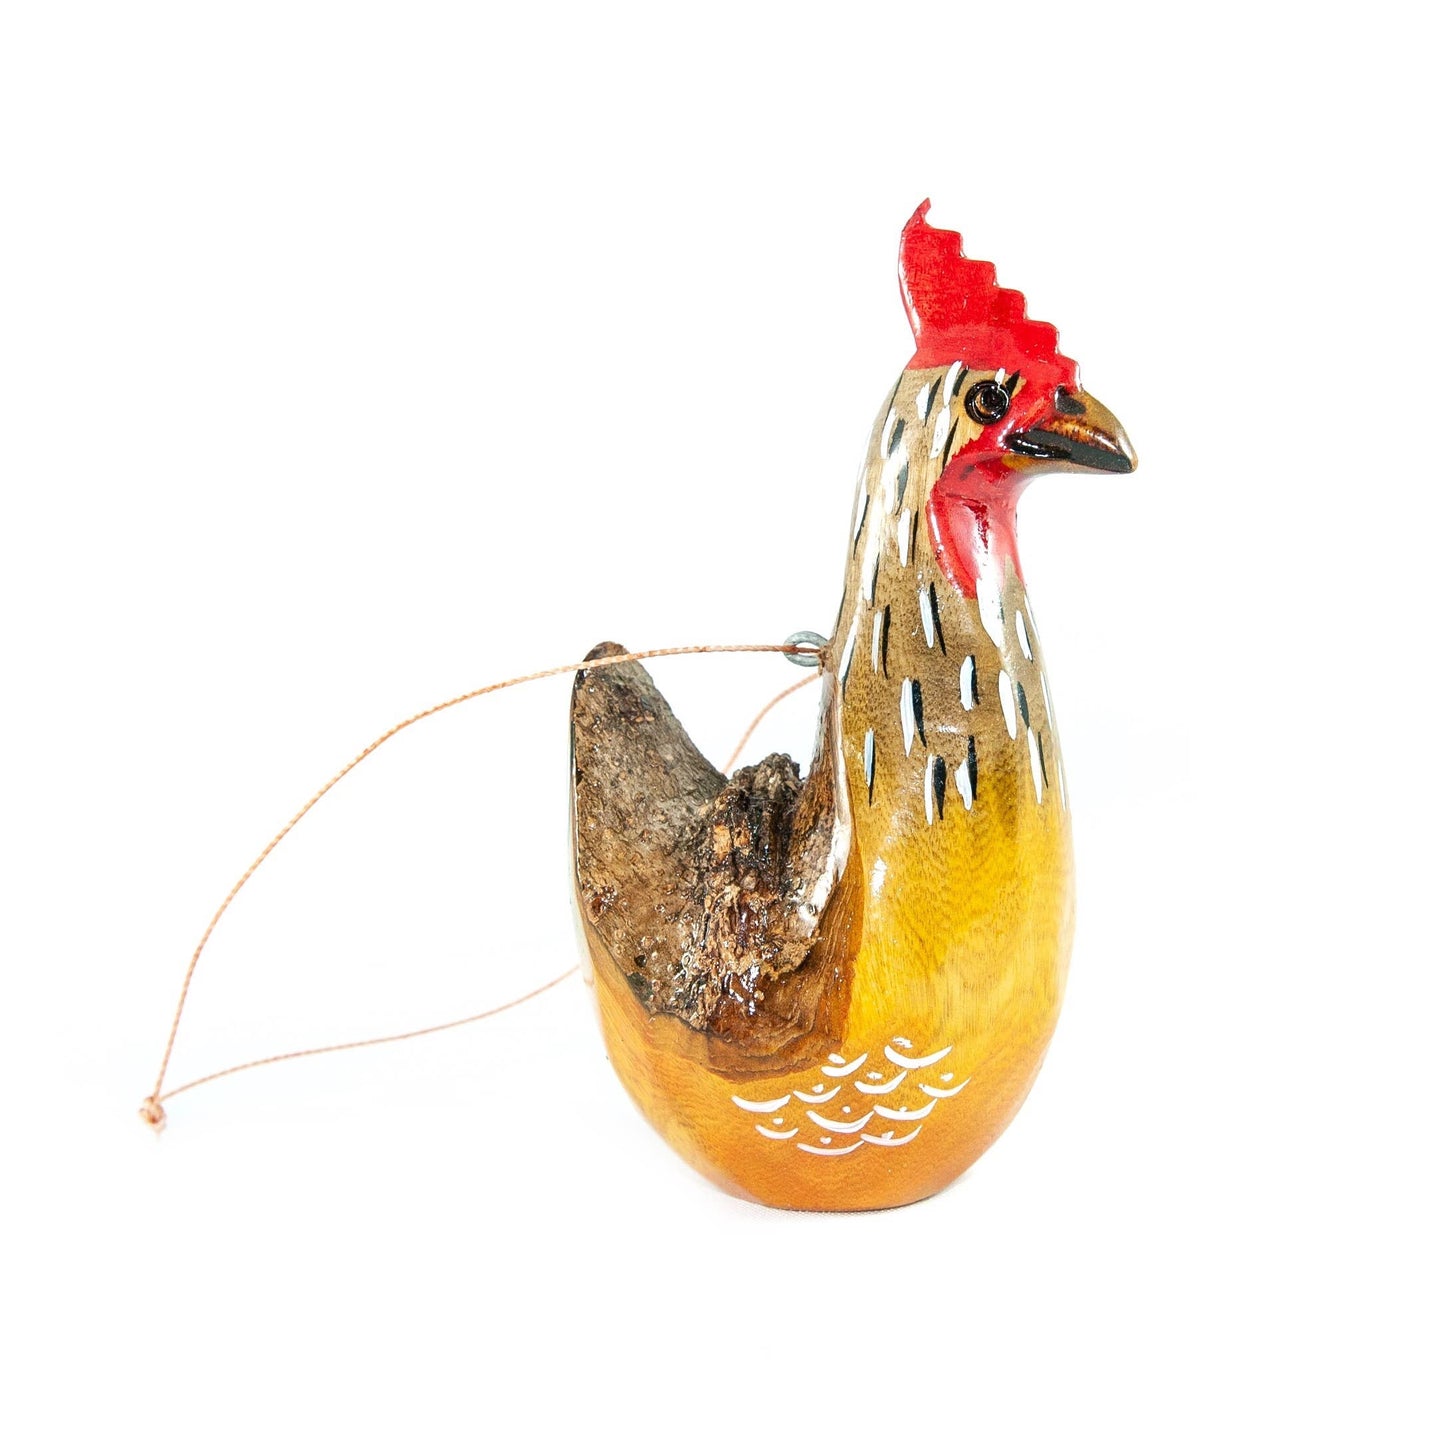 Chicken Wood Ornament from Ornaments 4 Orphans